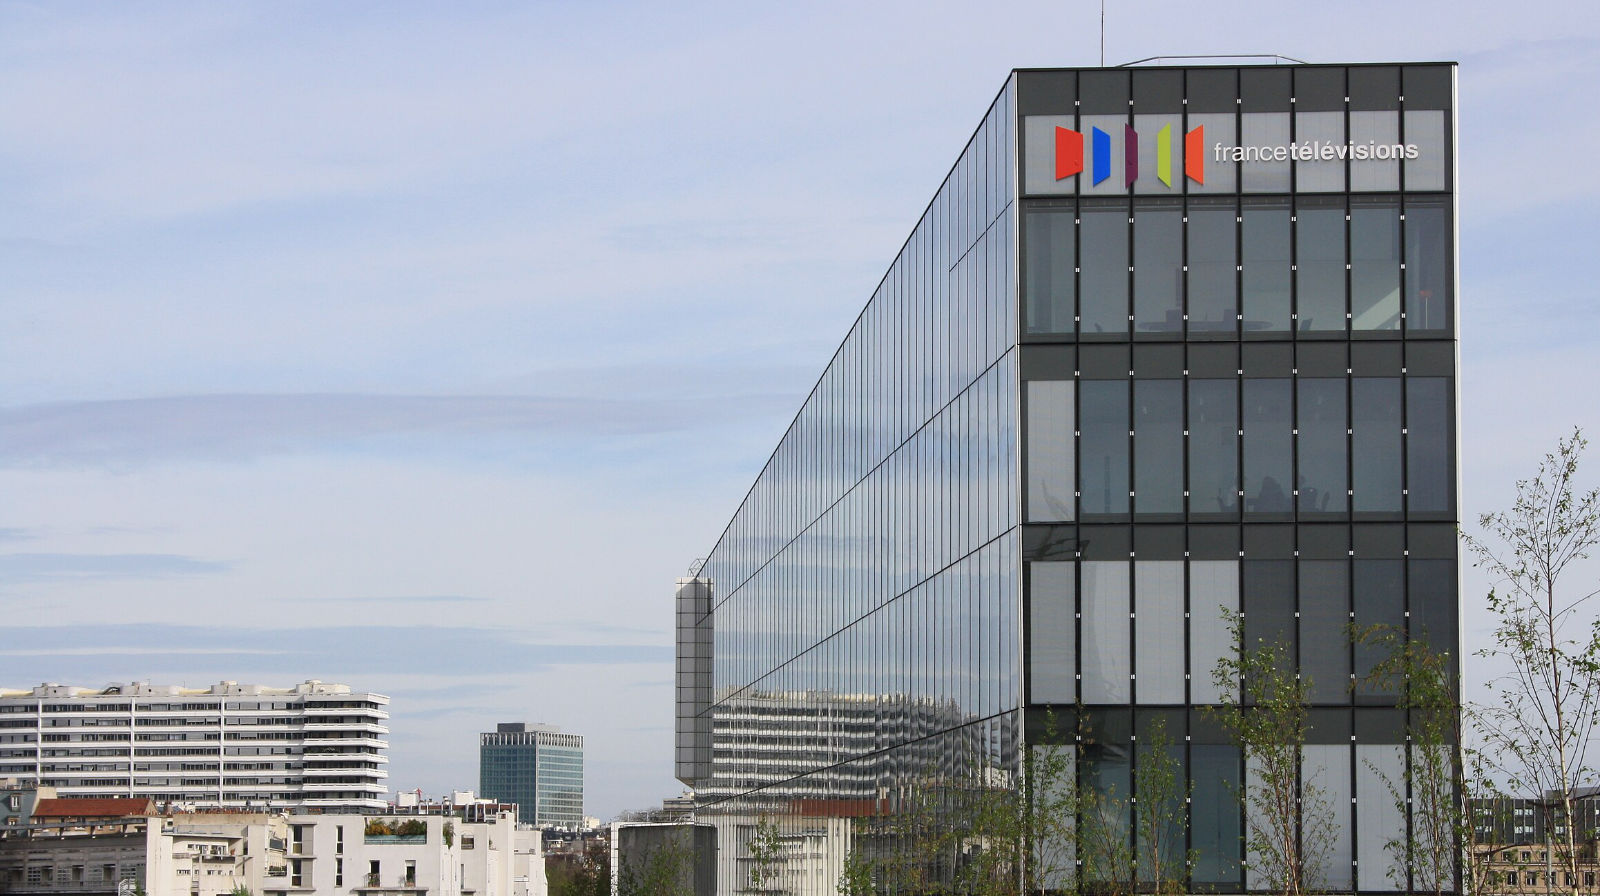 The headquarters of France Télévisions in Paris. (Photo by Lionel Allorge)